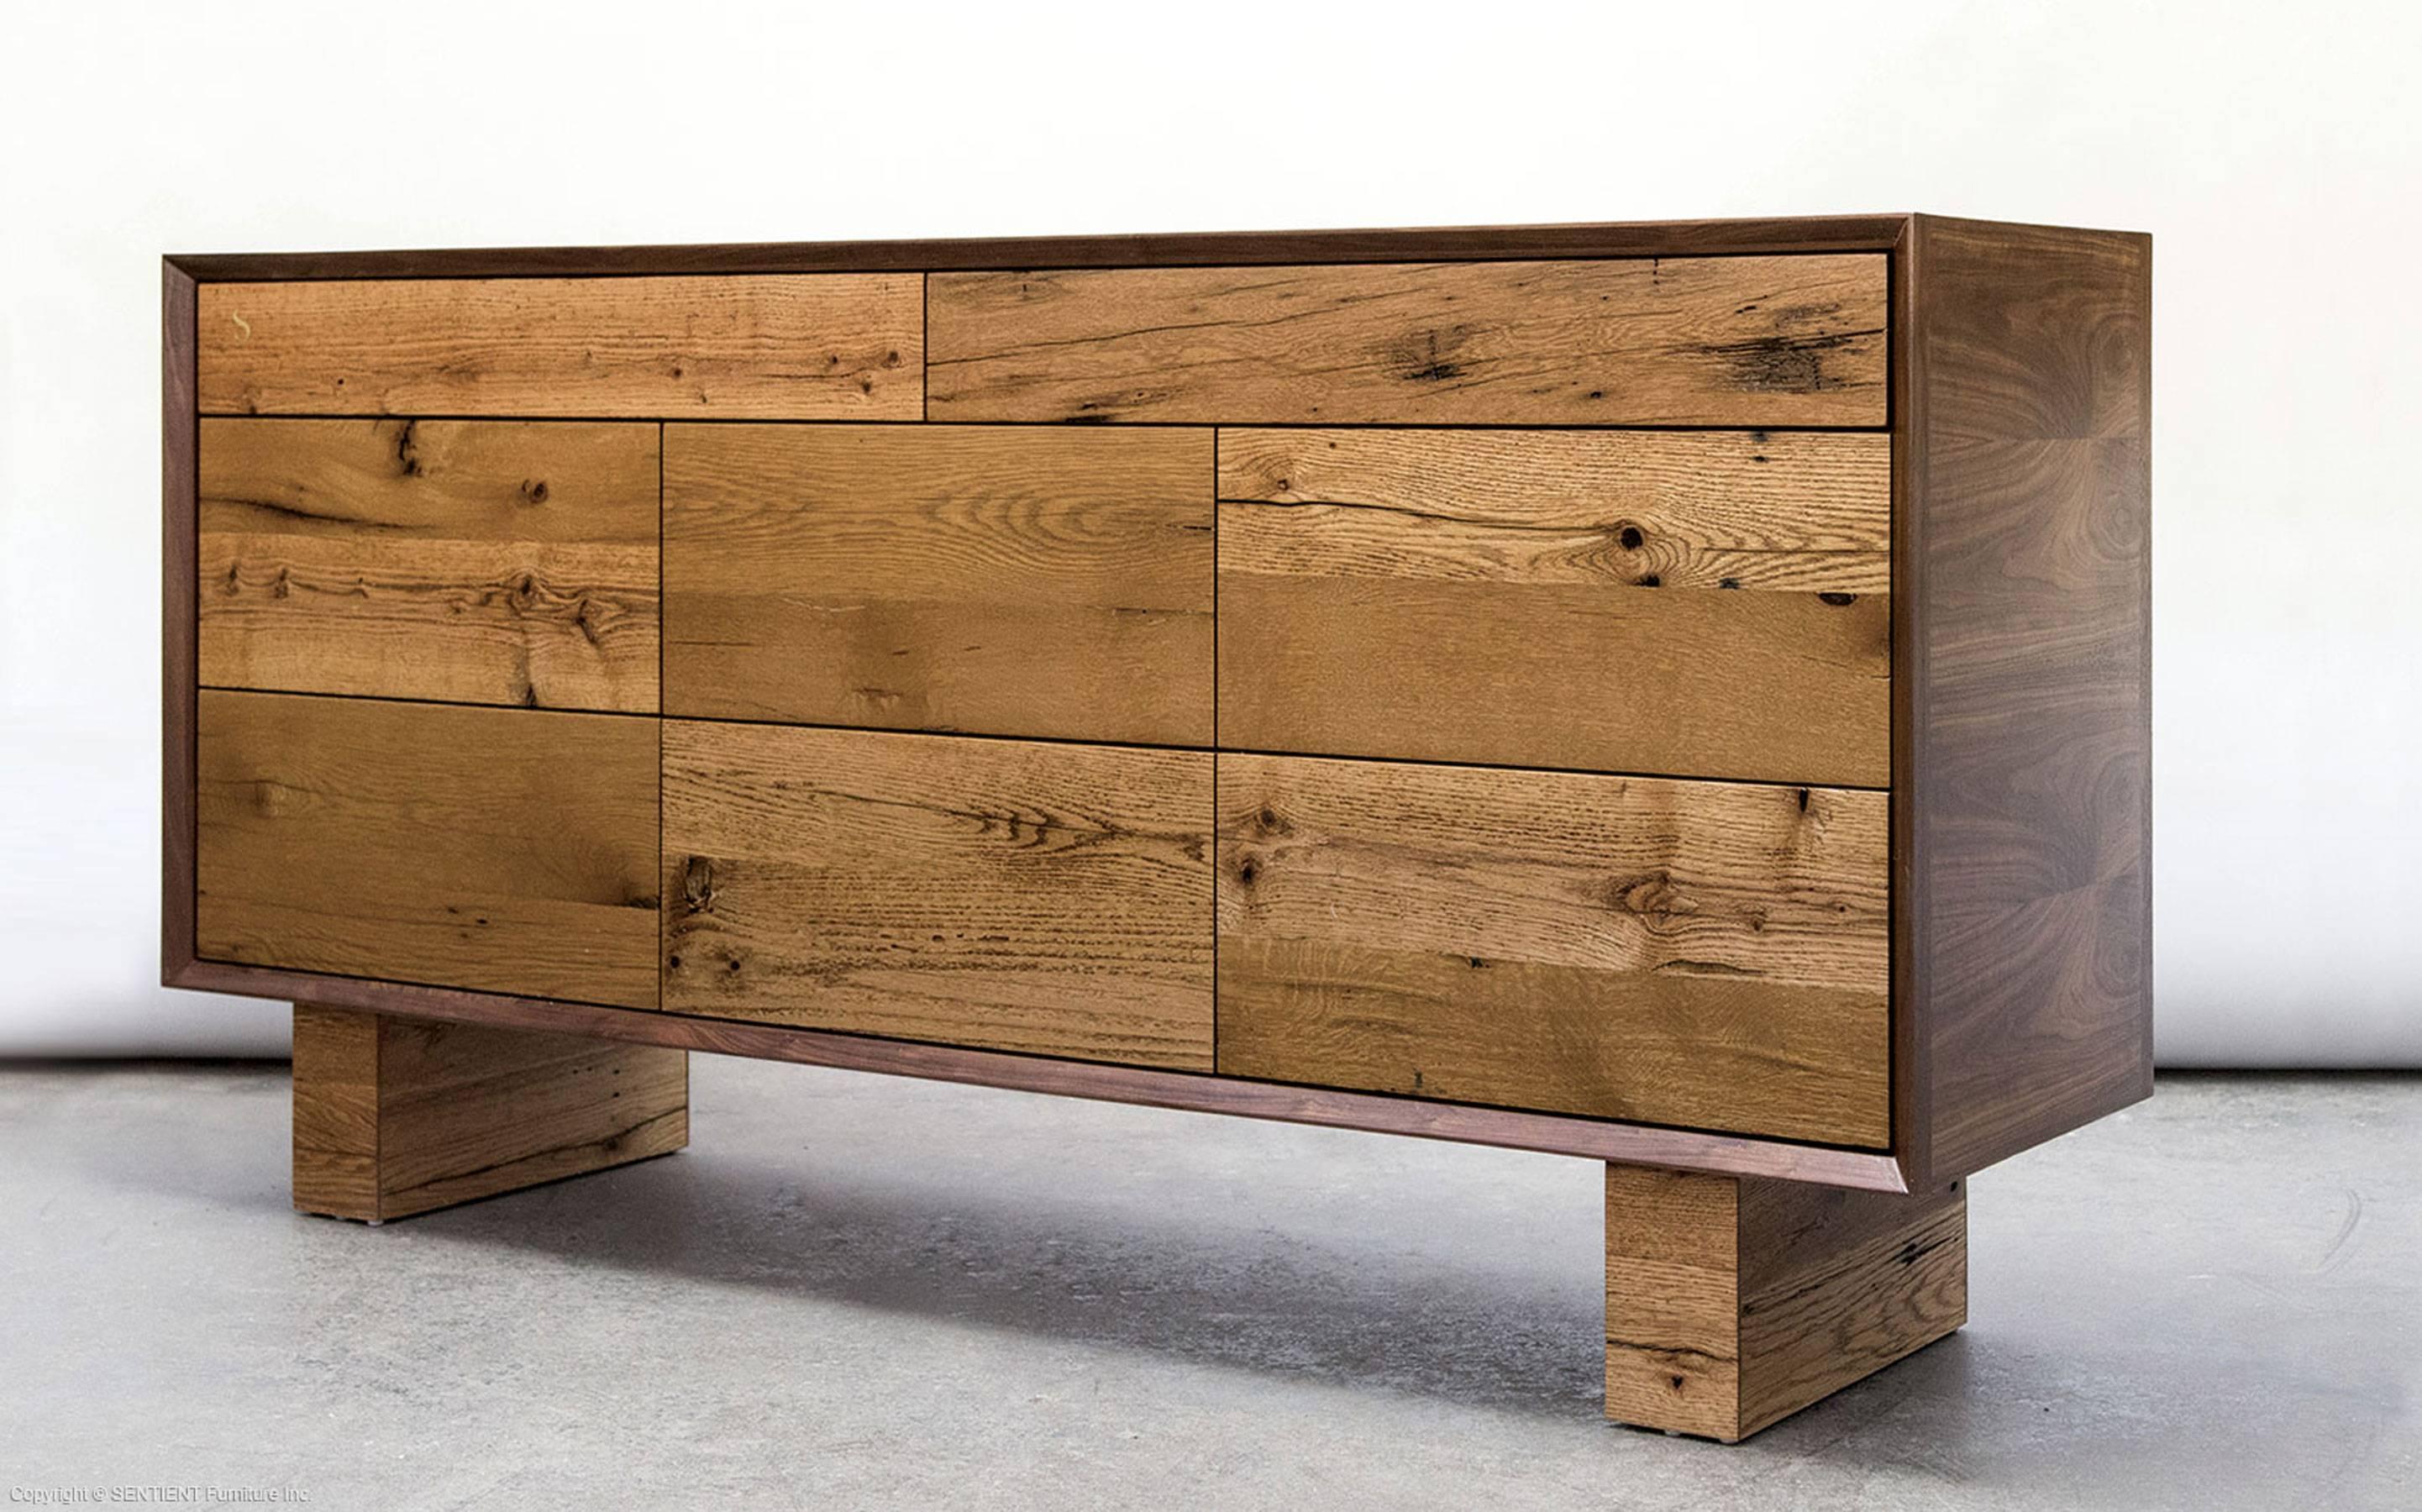 The sentient new old dresser is a grand juxtaposition between refined American black walnut and reclaimed oak from a barn in Pennsylvania. The result is a statement piece that can anchor a room or hallway. It operates as a very simple design, but